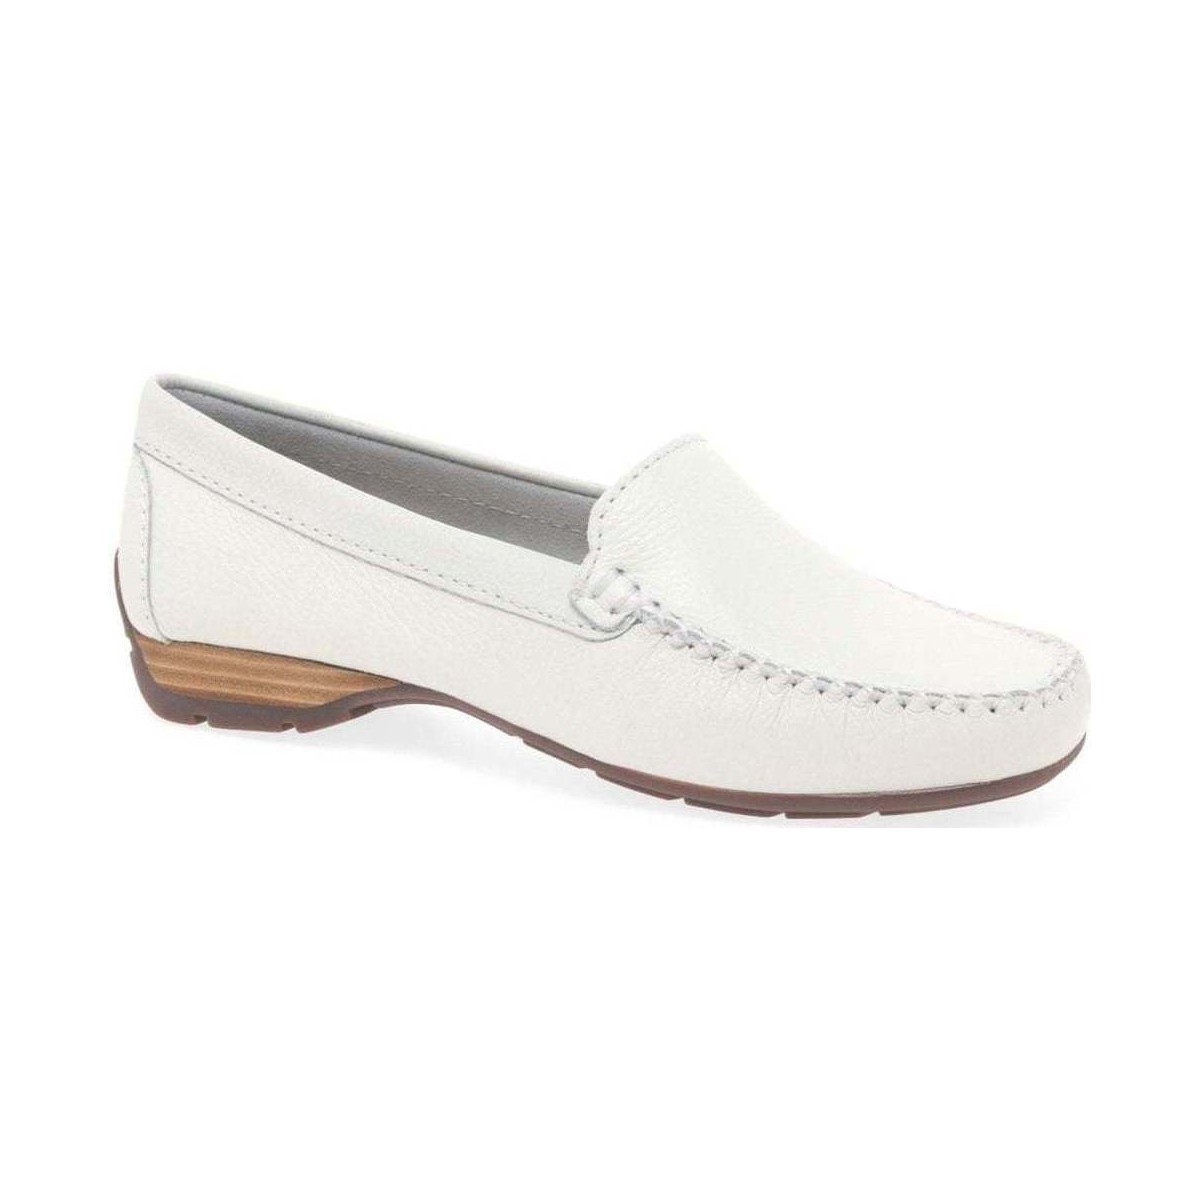 Shoes Women Derby Shoes & Brogues Charles Clinkard Sun II Womens Moccasins White